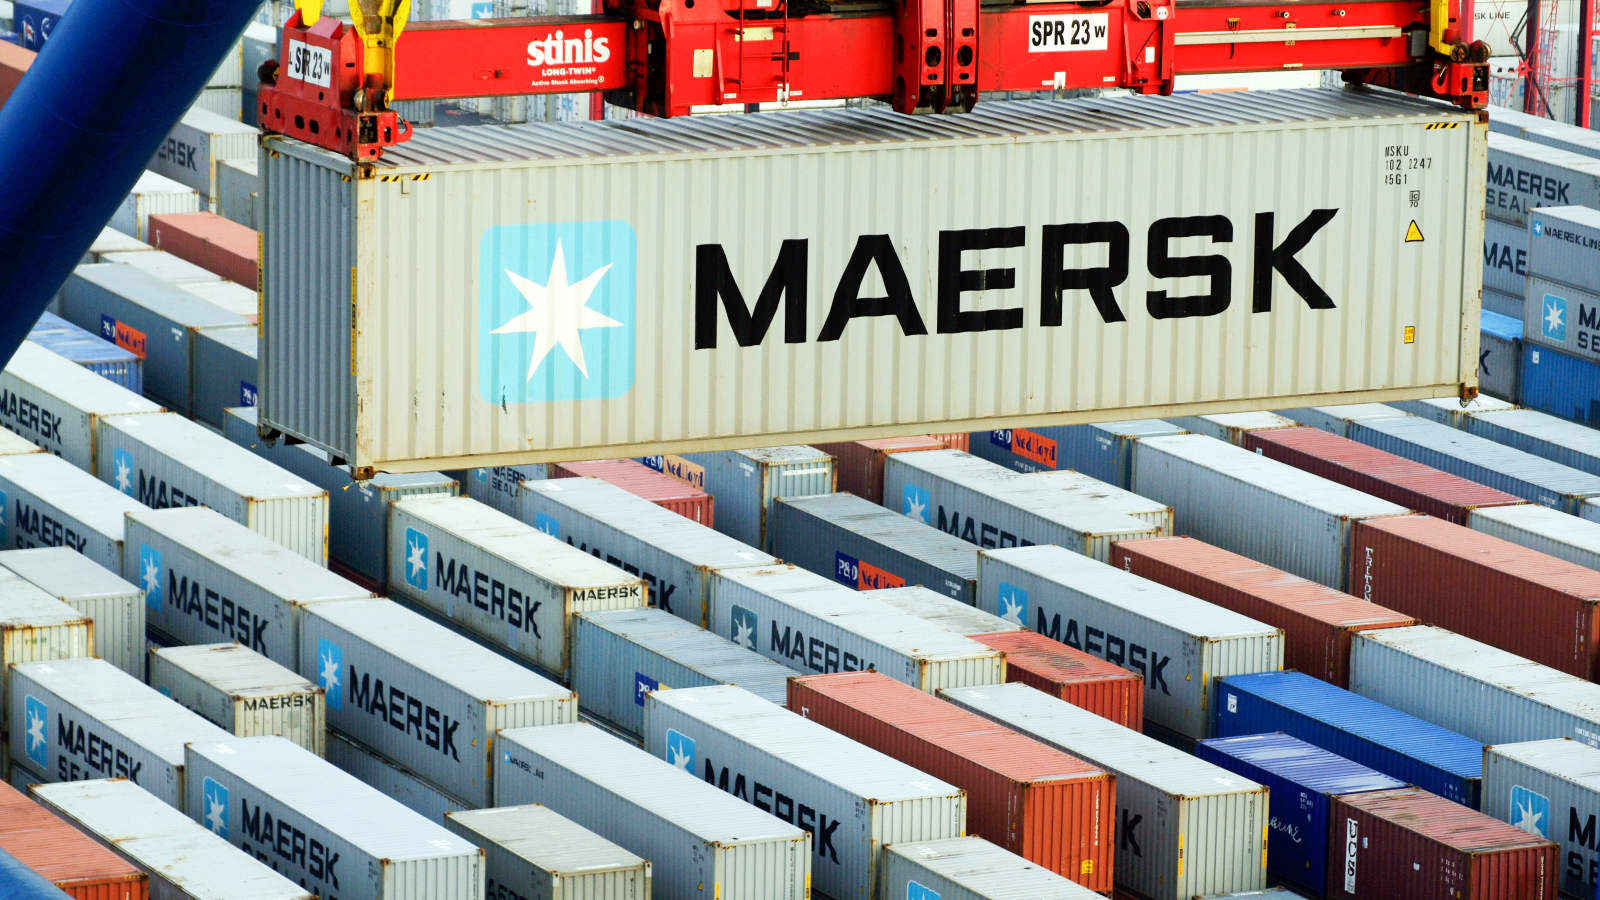 Maersk ship loses 750 boxes during another Pacific storm